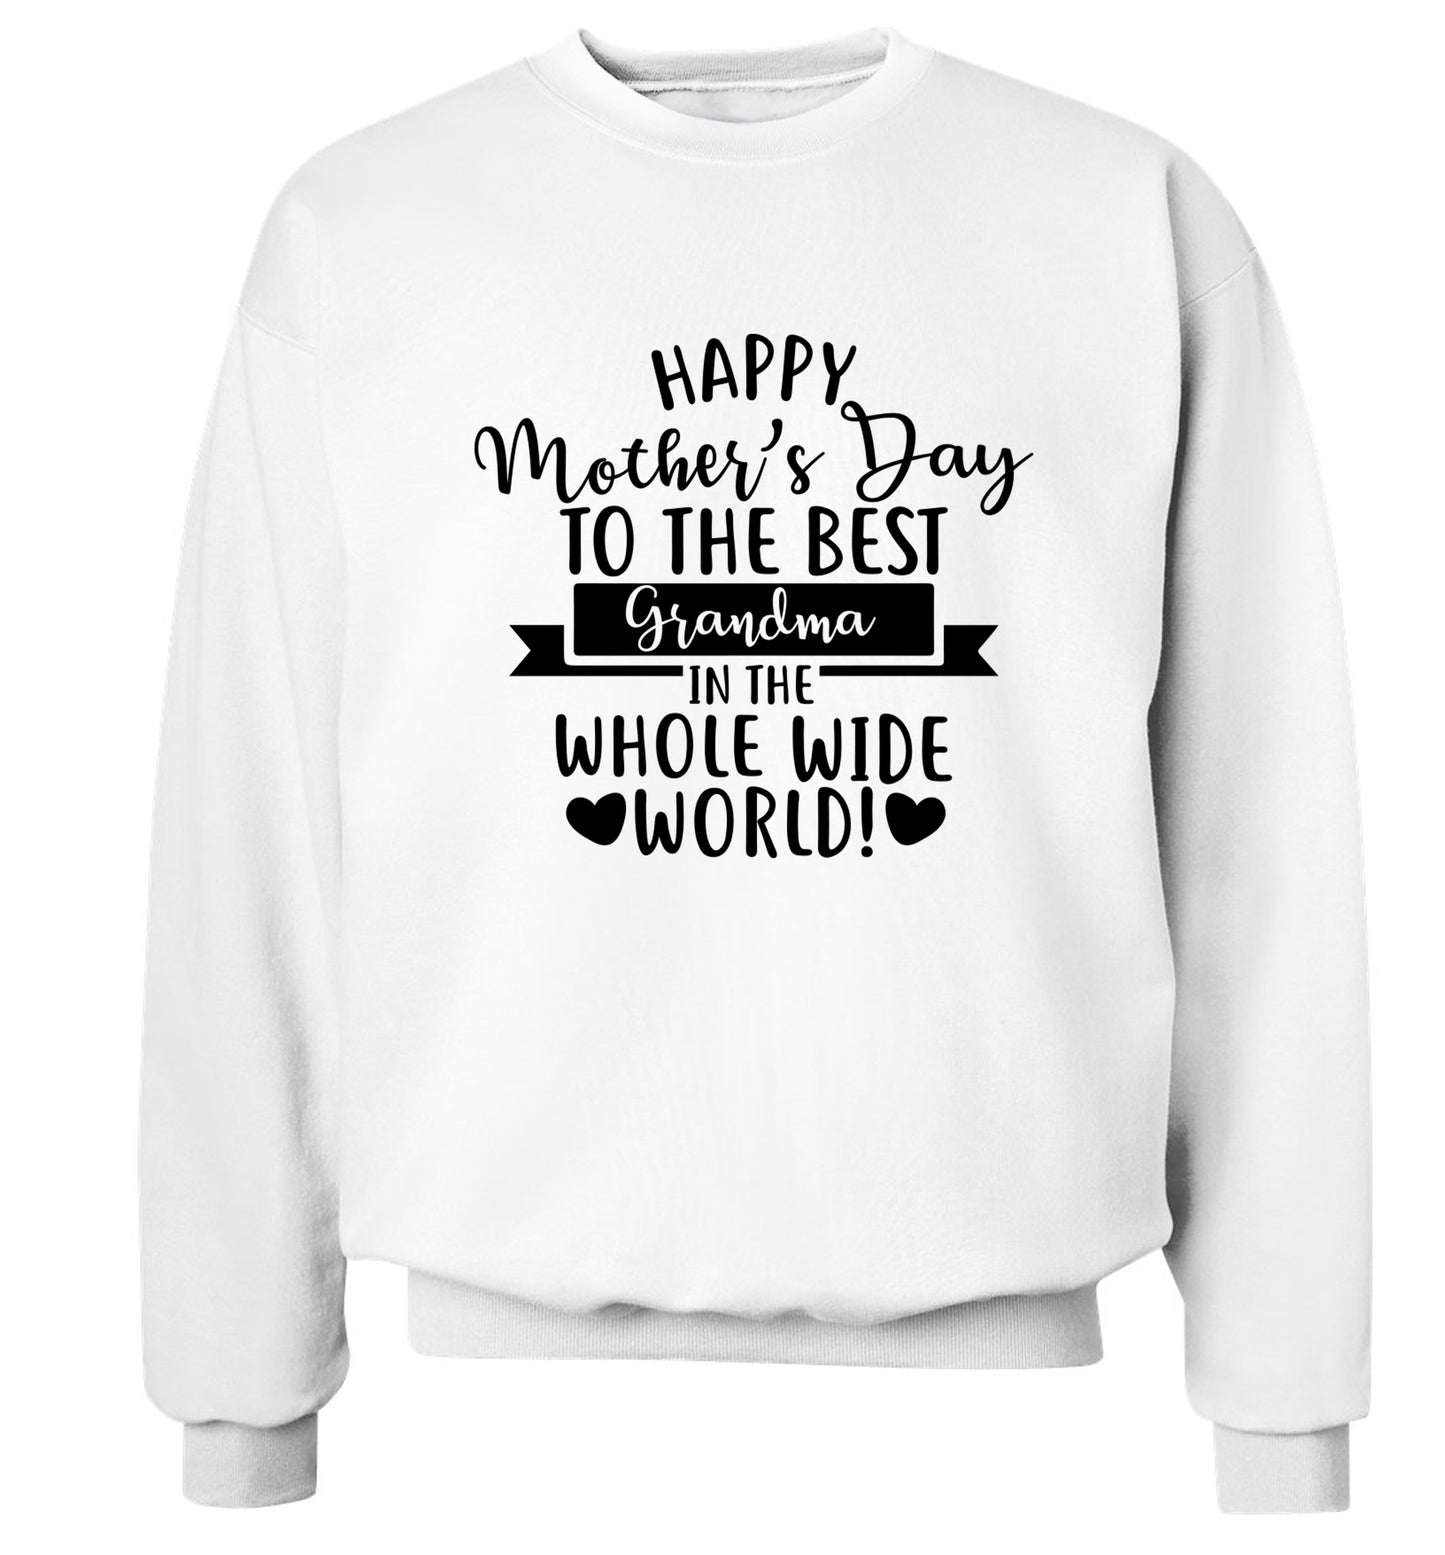 Happy mother's day to the best Grandma in the world Adult's unisex white Sweater 2XL